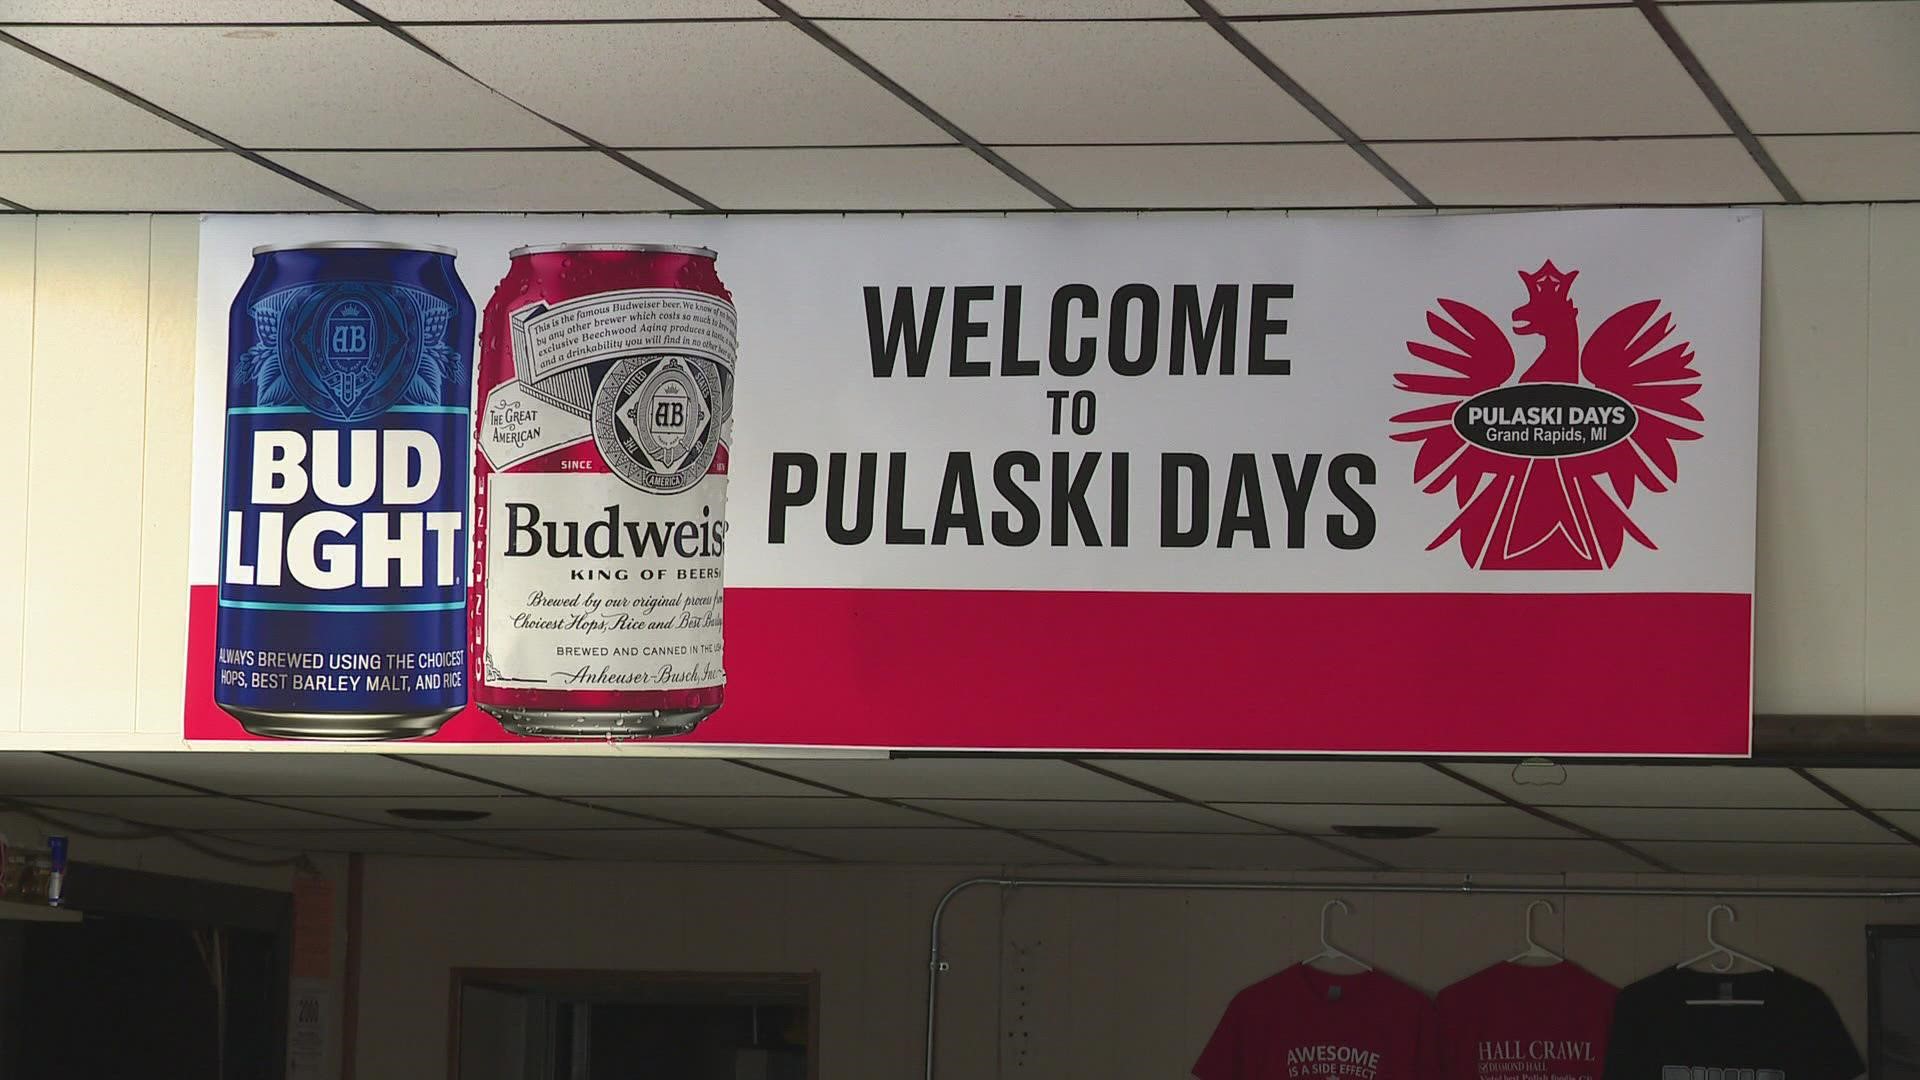 One year after the COVID-19 pandemic canceled Pulaski Days, the week-long event has returned to Grand Rapids with a pierogi-filled schedule.